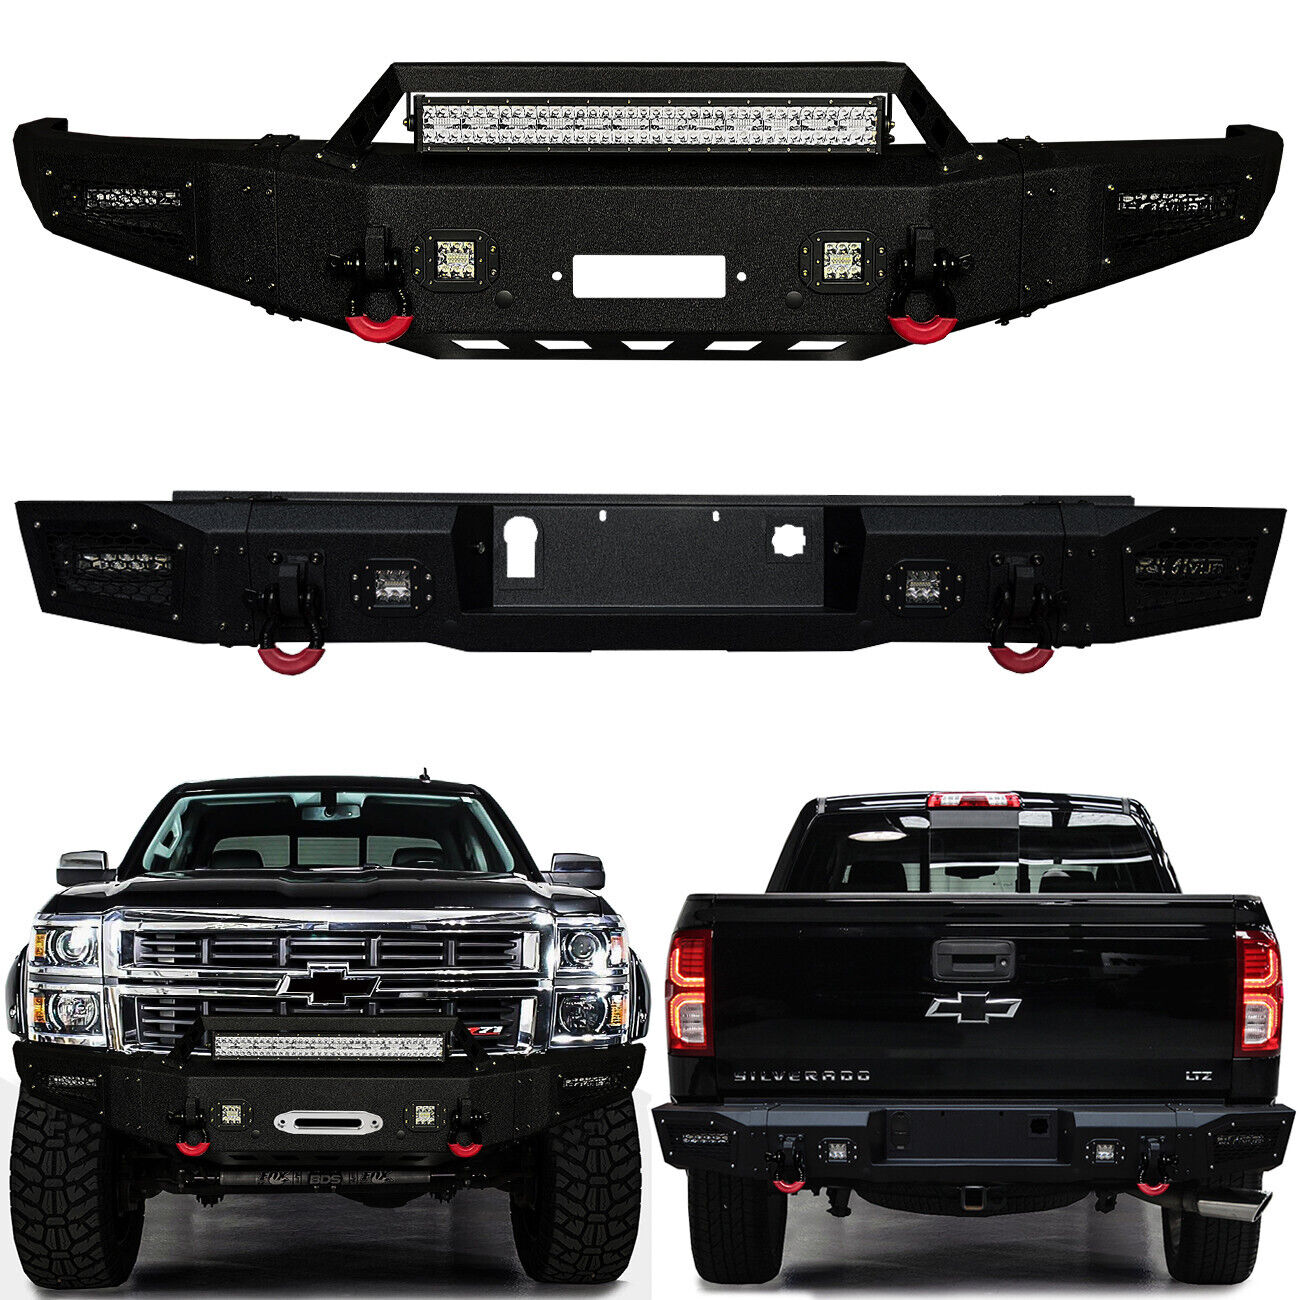 Fits 2014-2015 Chevy Silverado 1500 Front and Rear Bumper with Light and D-ring